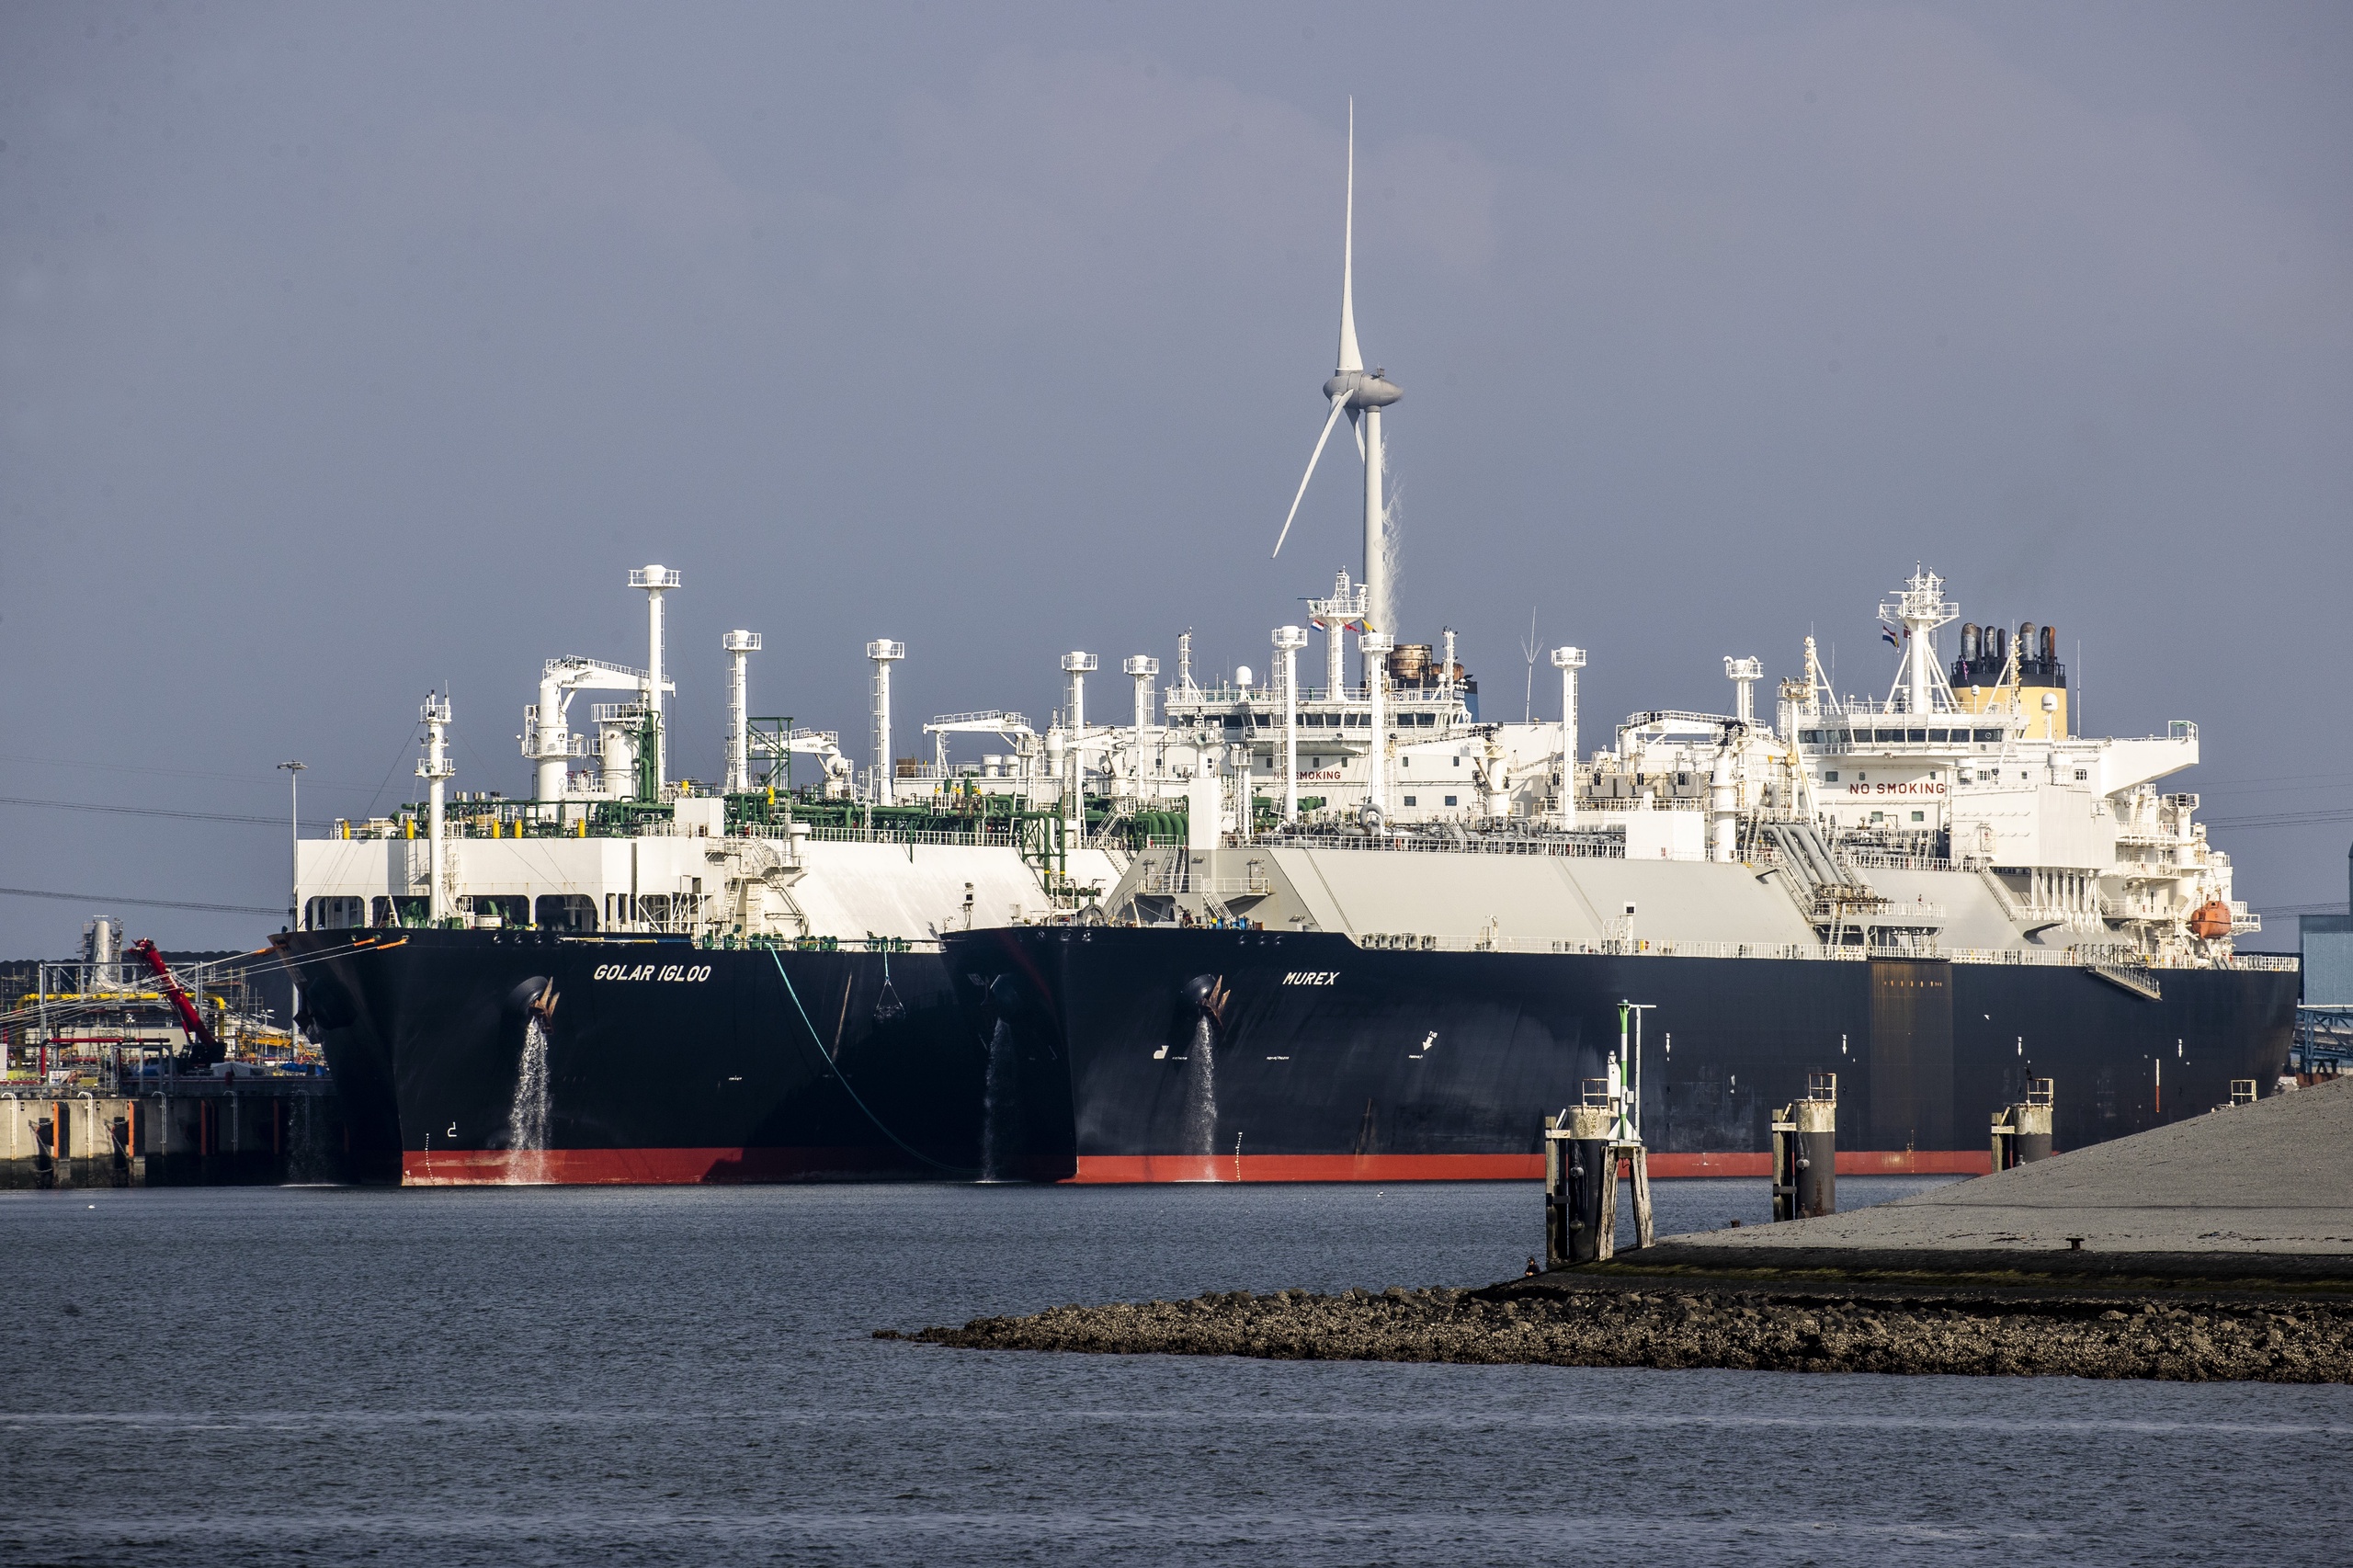 German energy group RWE has signed a fifteen-year deal to import liquefied natural gas (LNG) from the US.